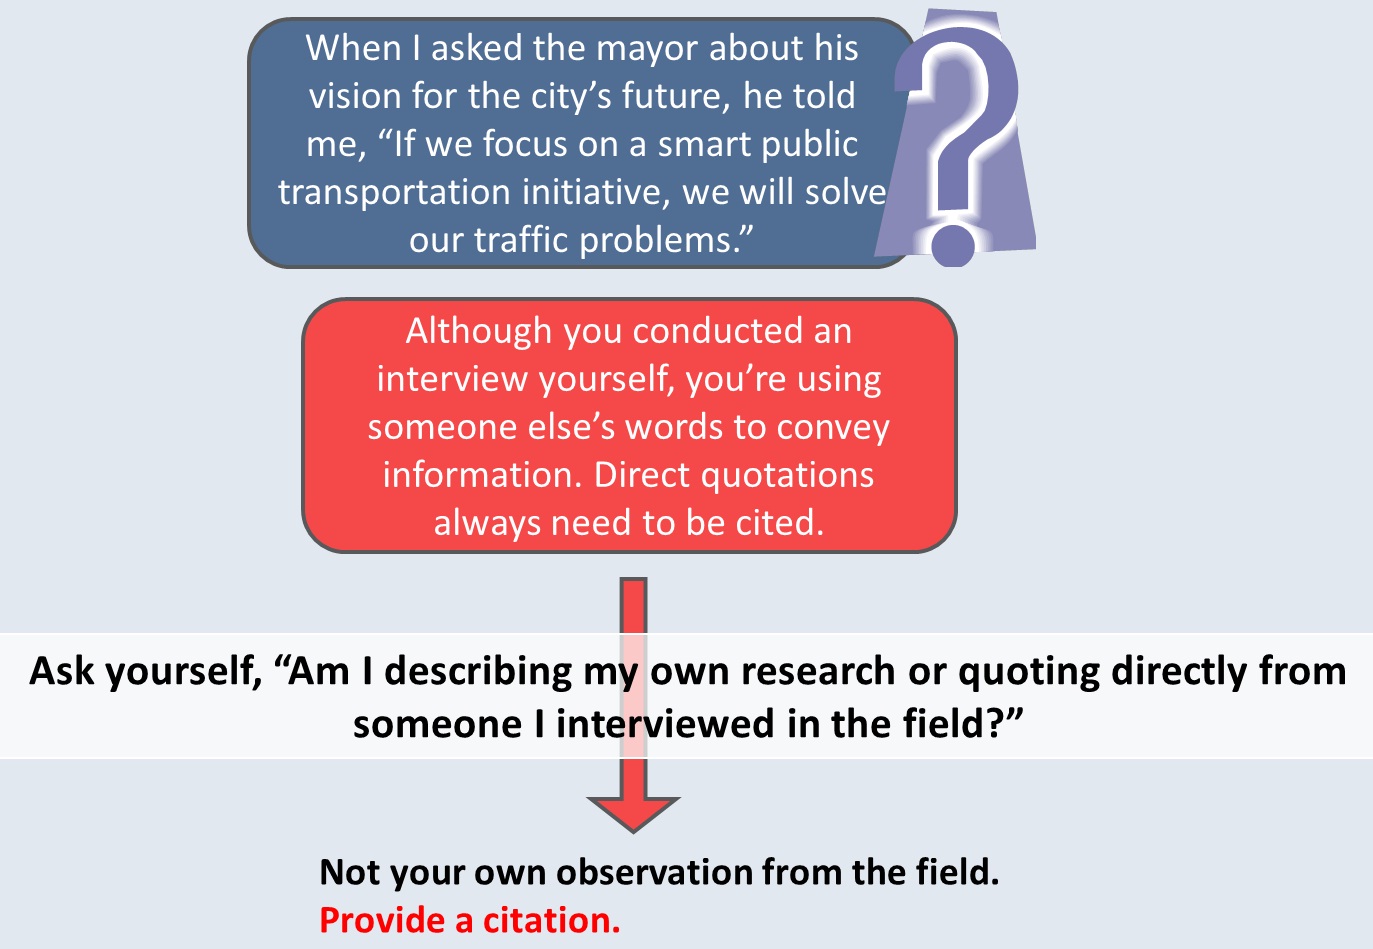 Example sentence. When I asked the mayor about his vision for the city’s future, he told me, “If we focus on a smart public transportation initiative, we will solve our traffic problems.” Analysis. To determine if this is your own research, ask yourself, “Am I describing my own research or quoting directly from someone I interviewed in the field?” Conclusion. If the statement is not your own observation from the field, you should provide a citation.